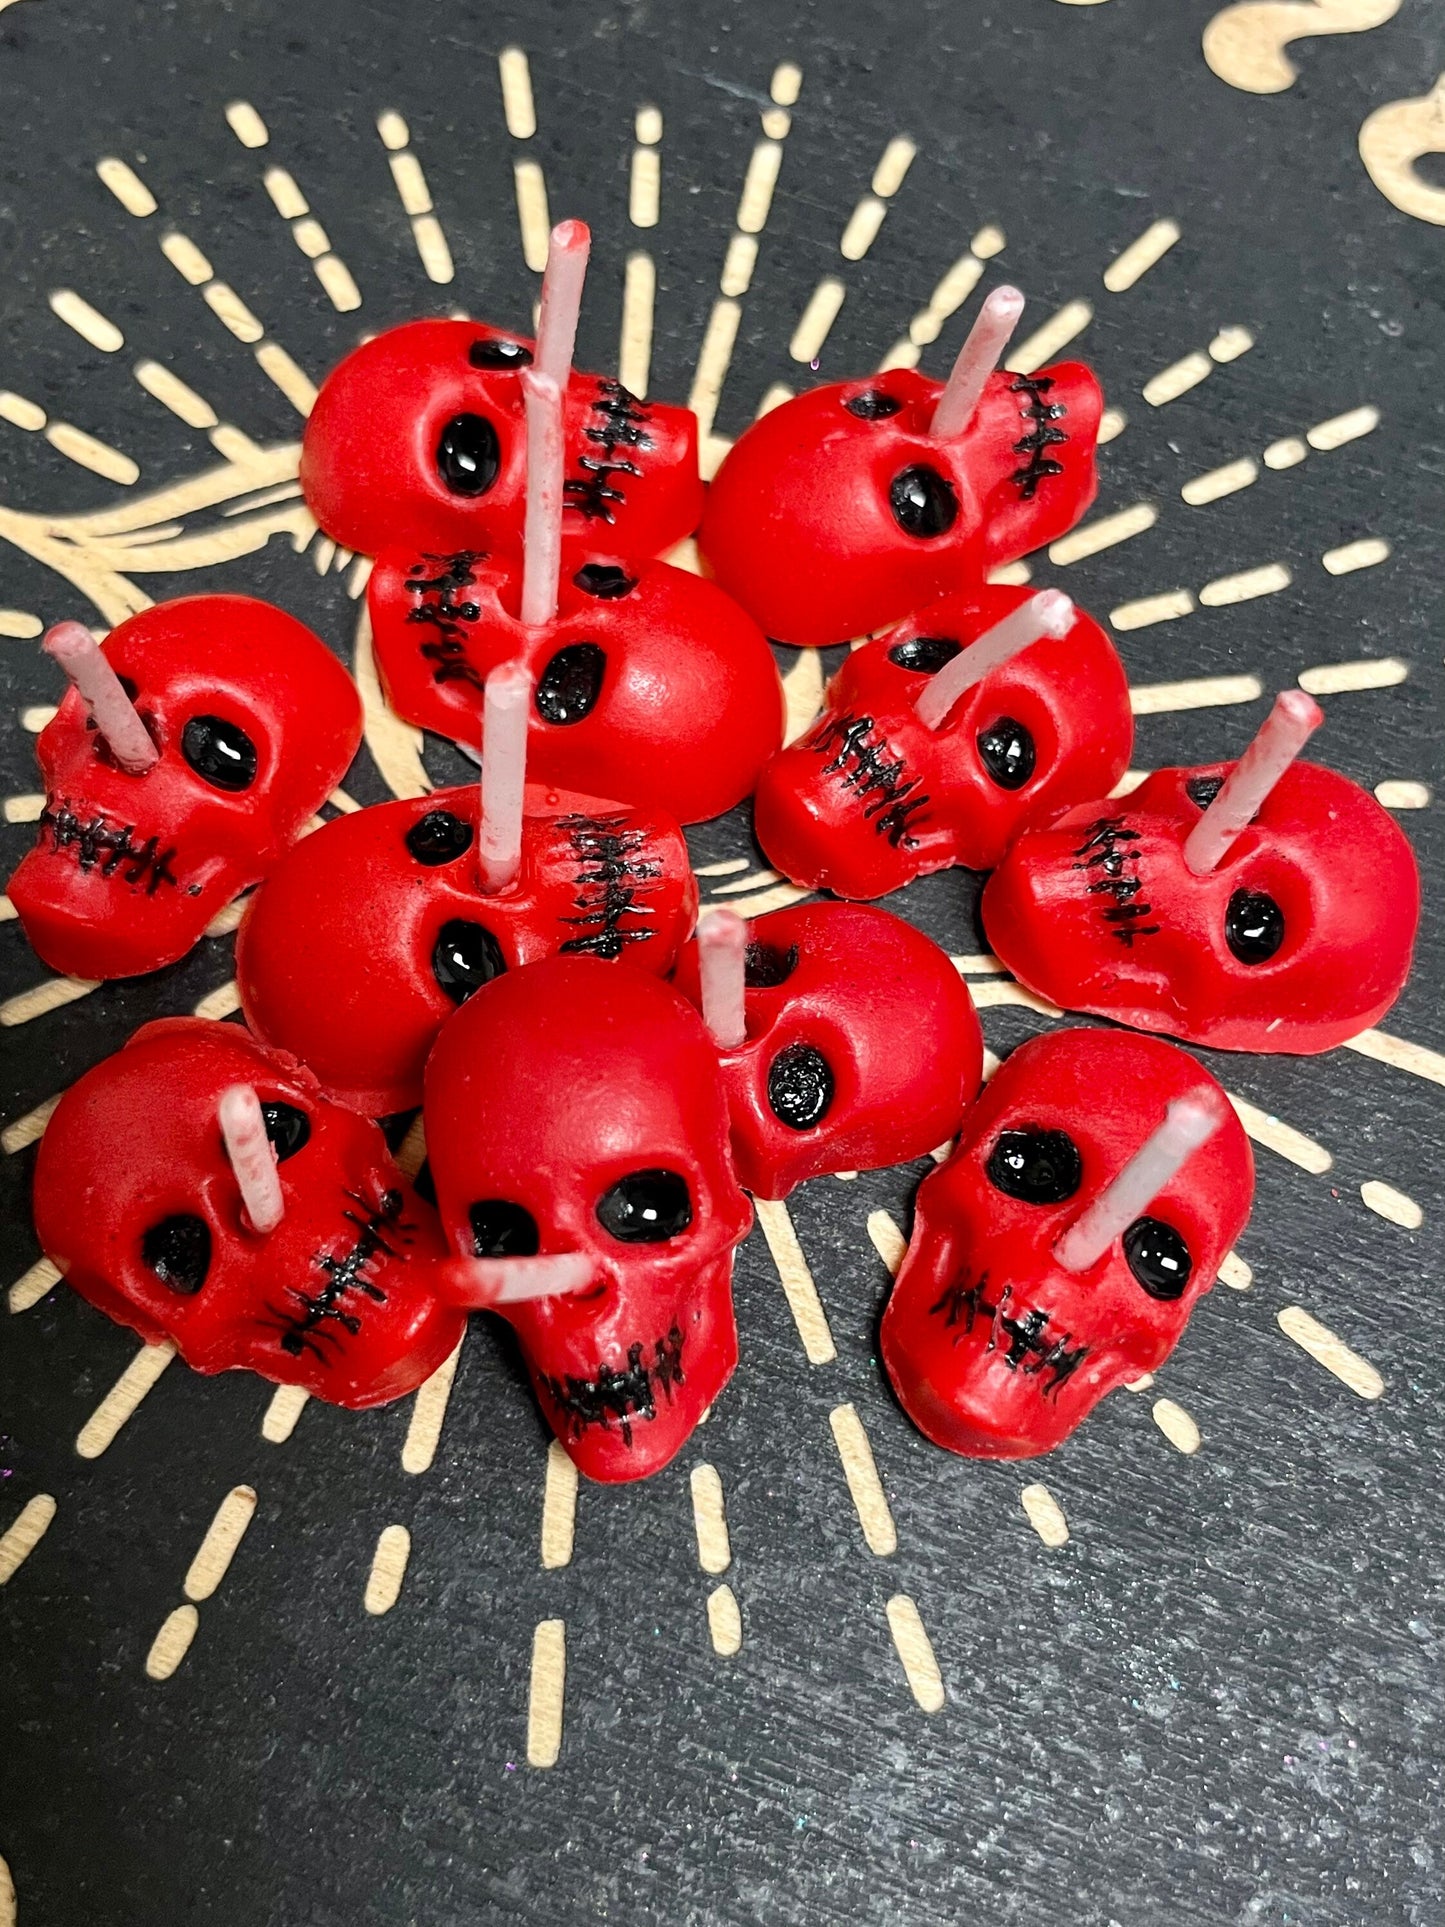 Red Skull Candle, Domination Spell, Mini Skull Candles, Ritual Candles, Fast Burn Time